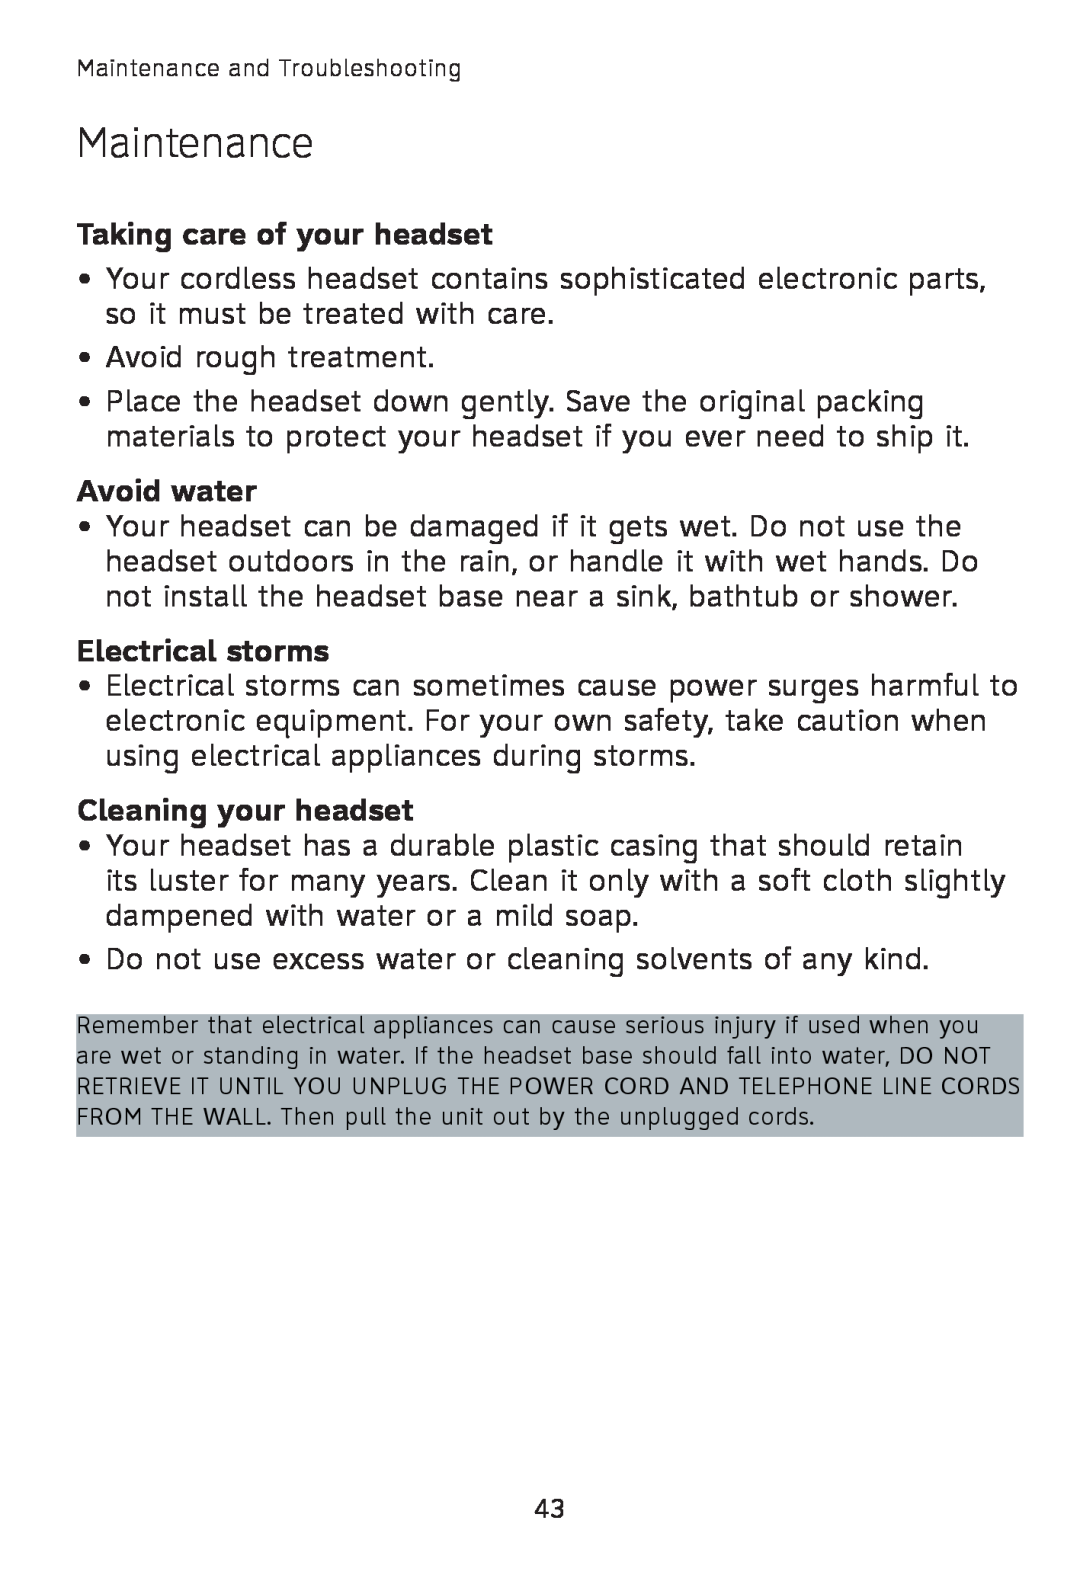 AT&T TL7600 user manual Maintenance, Taking care of your headset, Avoid water, Electrical storms, Cleaning your headset 